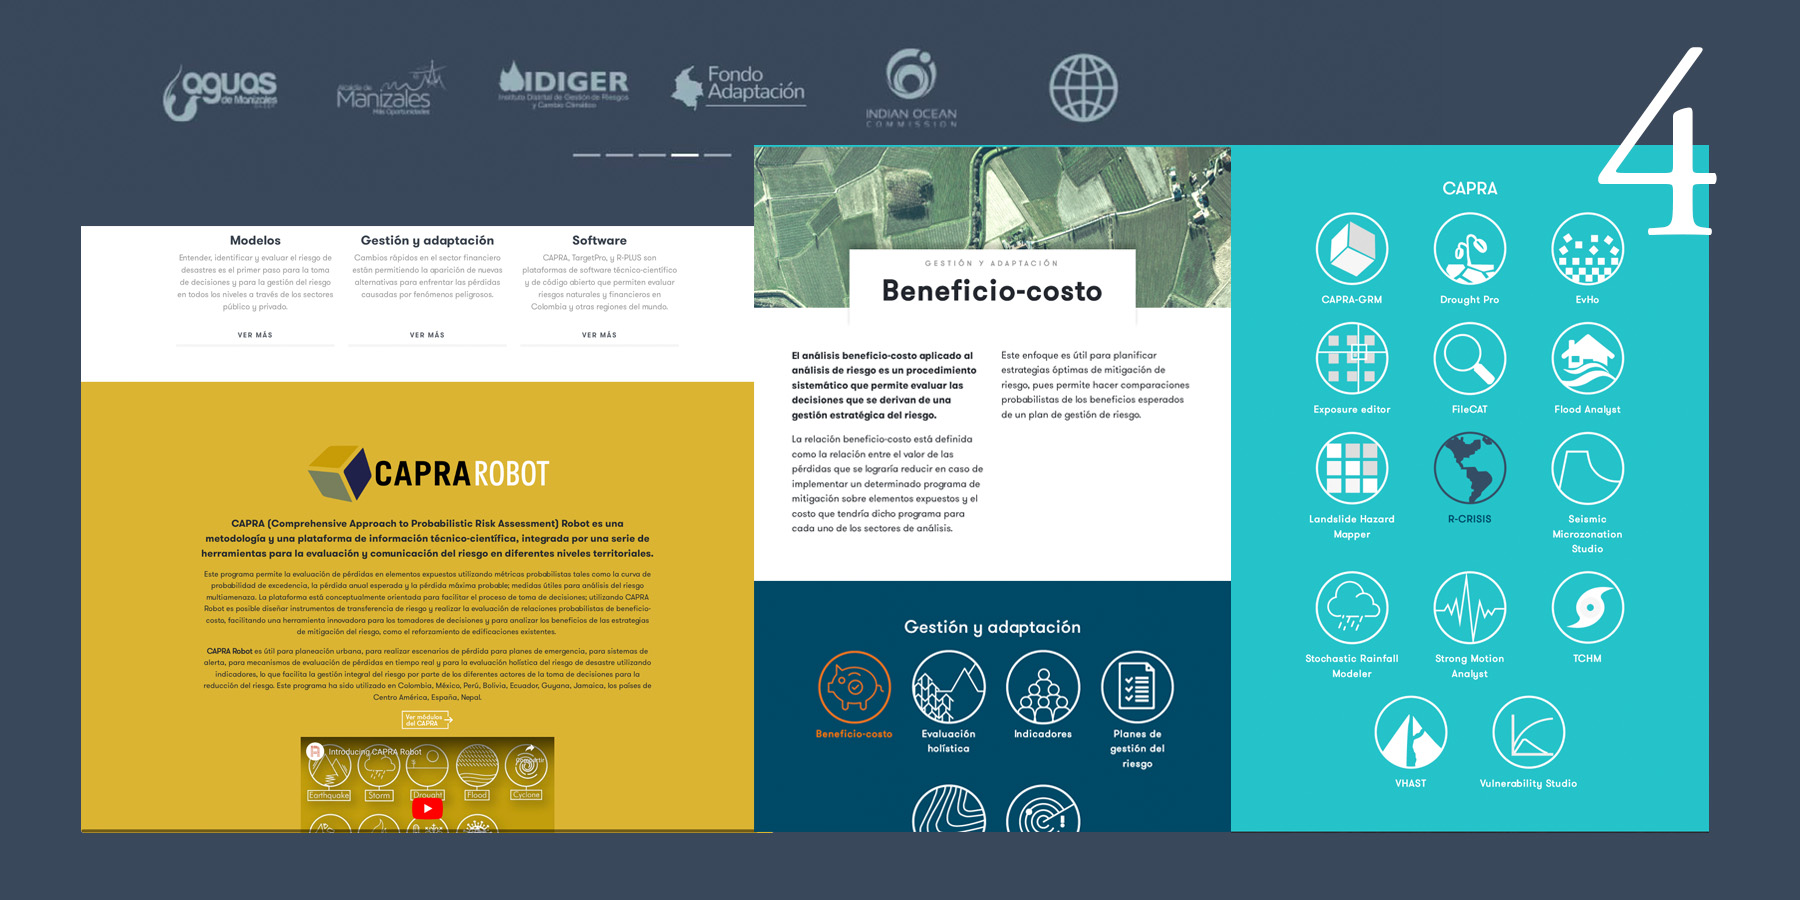 Multiple image captures from different pages belonging to Ingeniar Risk Intelligence's website: Software services, Cost-benefit, and CAPRA (software) modules.